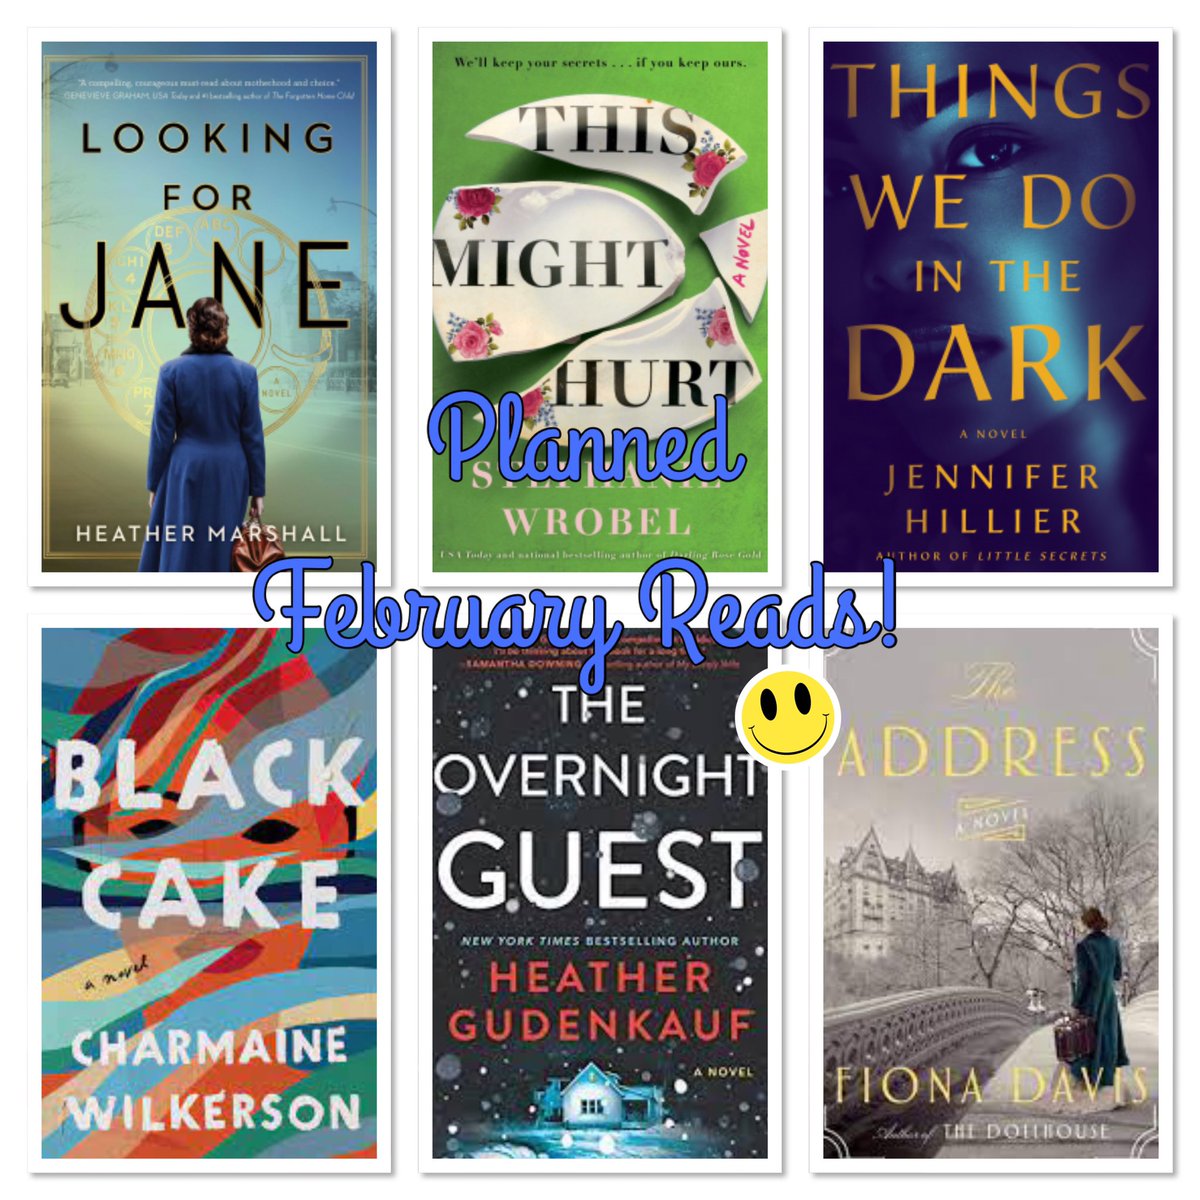 Happy February! Have some good books on my February TBR pile. ☺️Have a great (reading) month everyone!
#lookingforjane #thismighthurt #thingswedointhedark #blackcake #theovernightguest #theaddress #books #februaryreads #BookTwitter